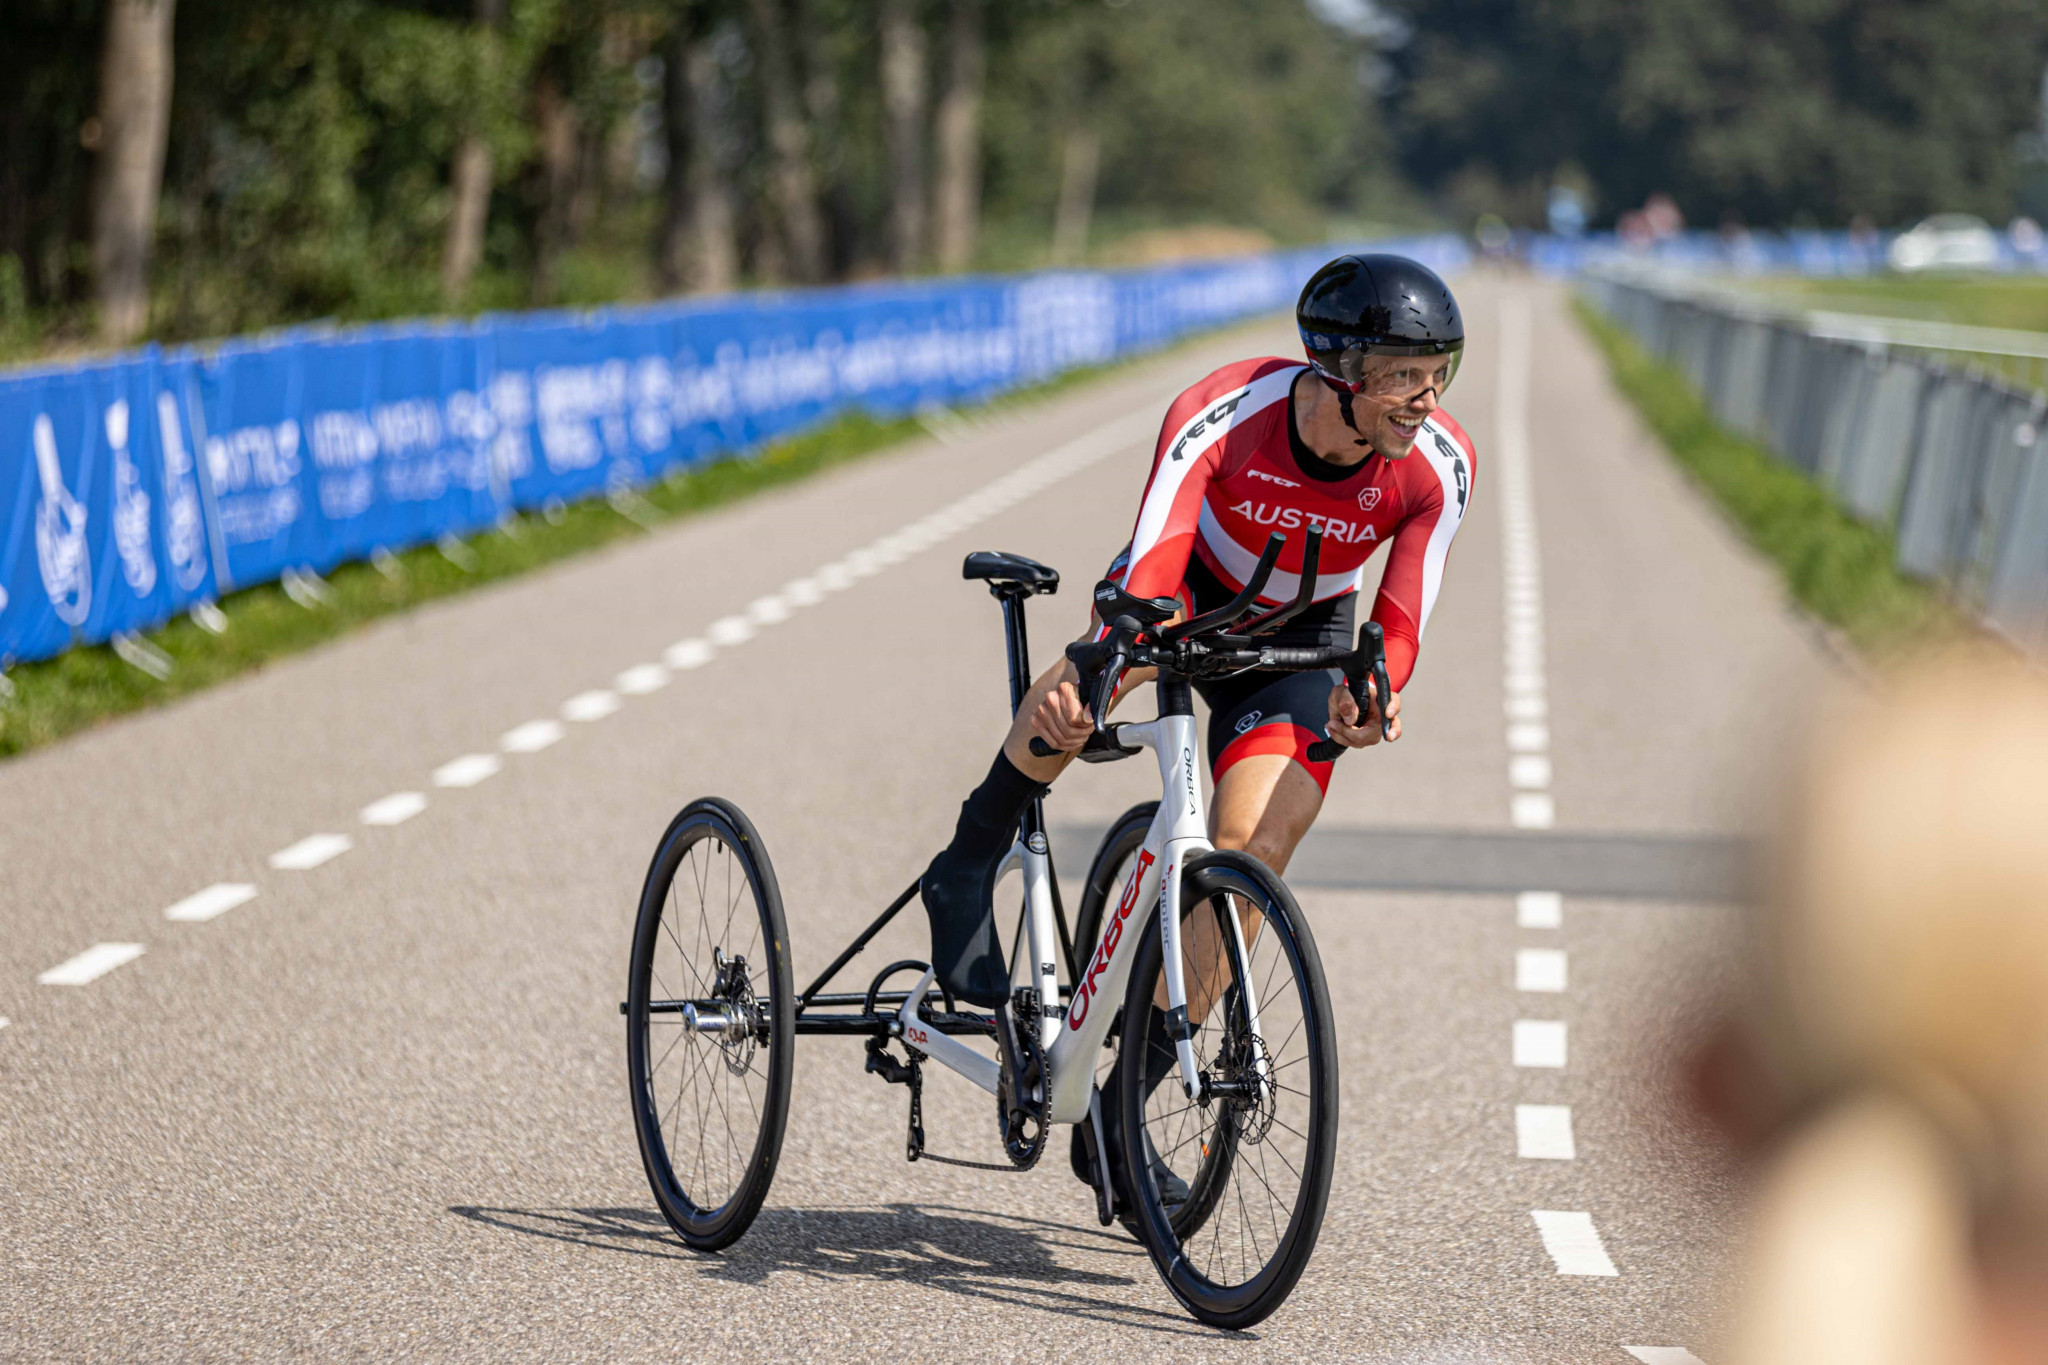 The individual time trial races ran from Zevenhuizen, which is about 12 km northeast of Rotterdam, to Willem Alexander Baan  ©EPC